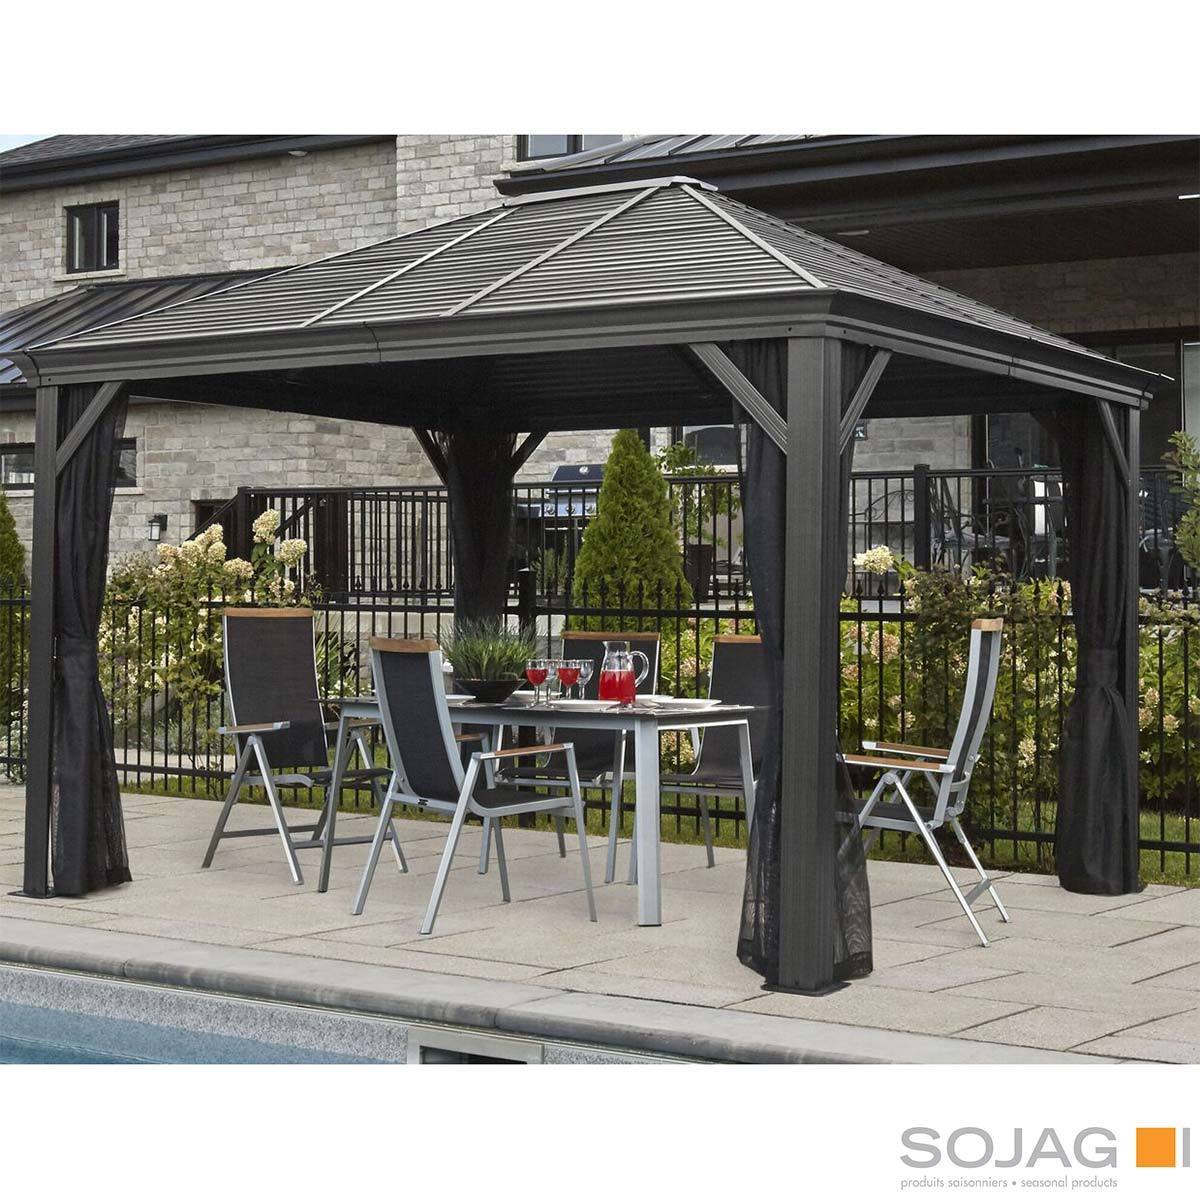 Sojag Mykonos 10ft x 12ft (3.05 x 3.65m) Aluminium Frame Sun Shelter with Galvanised Steel Roof + Insect Netting